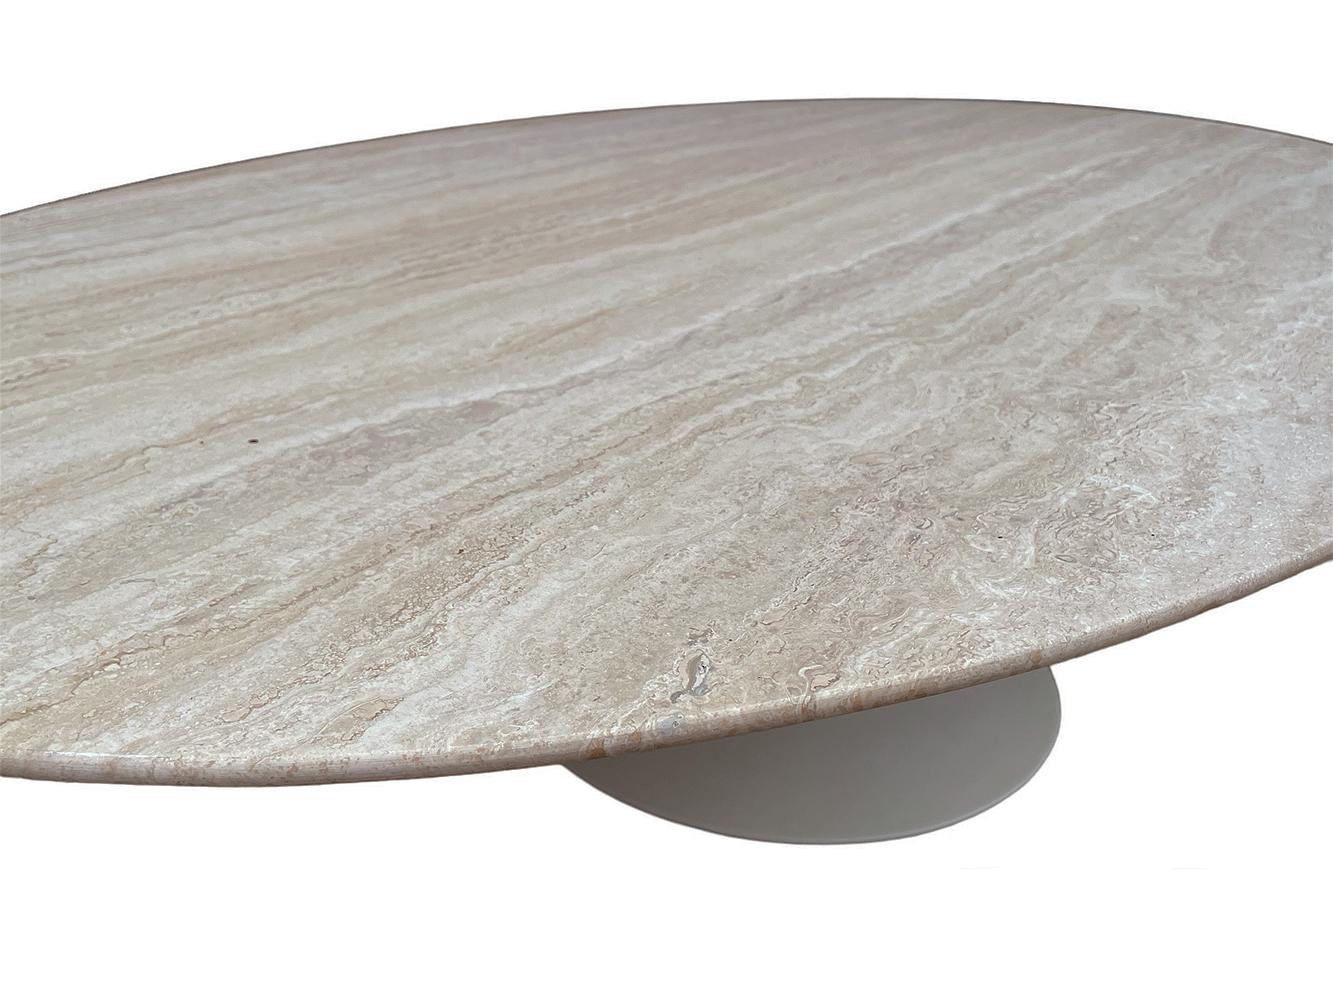 Aluminum Mid Century Modern Oval Travertine Marble Cocktail Table by Saarinen for Knoll  For Sale